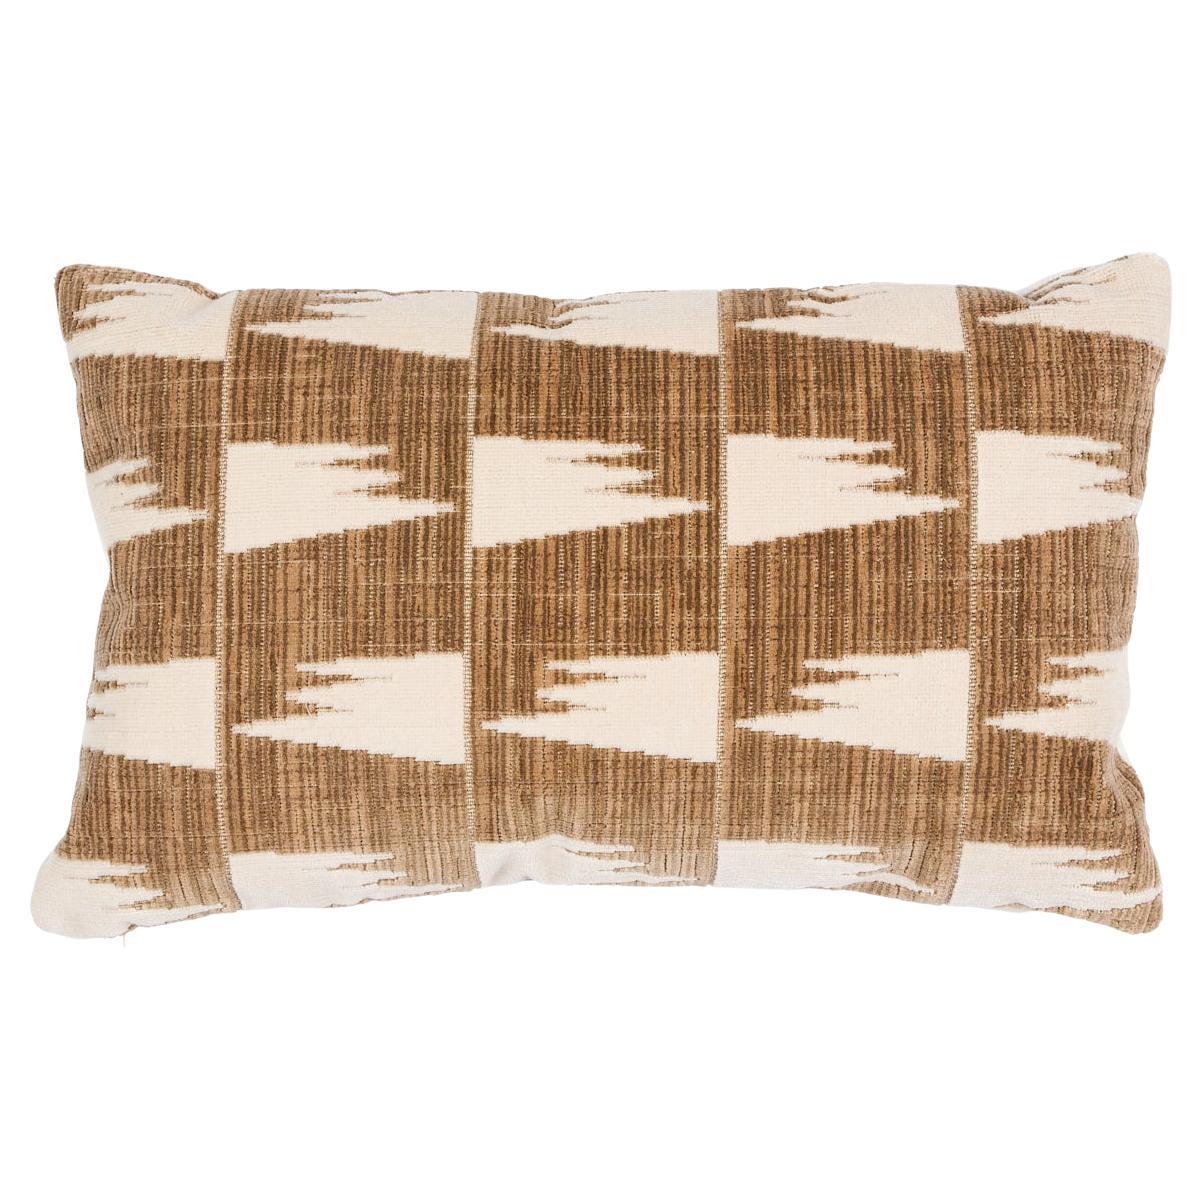 Schumacher Tutsi in Natural/Ivory 24 x 12" Pillow For Sale